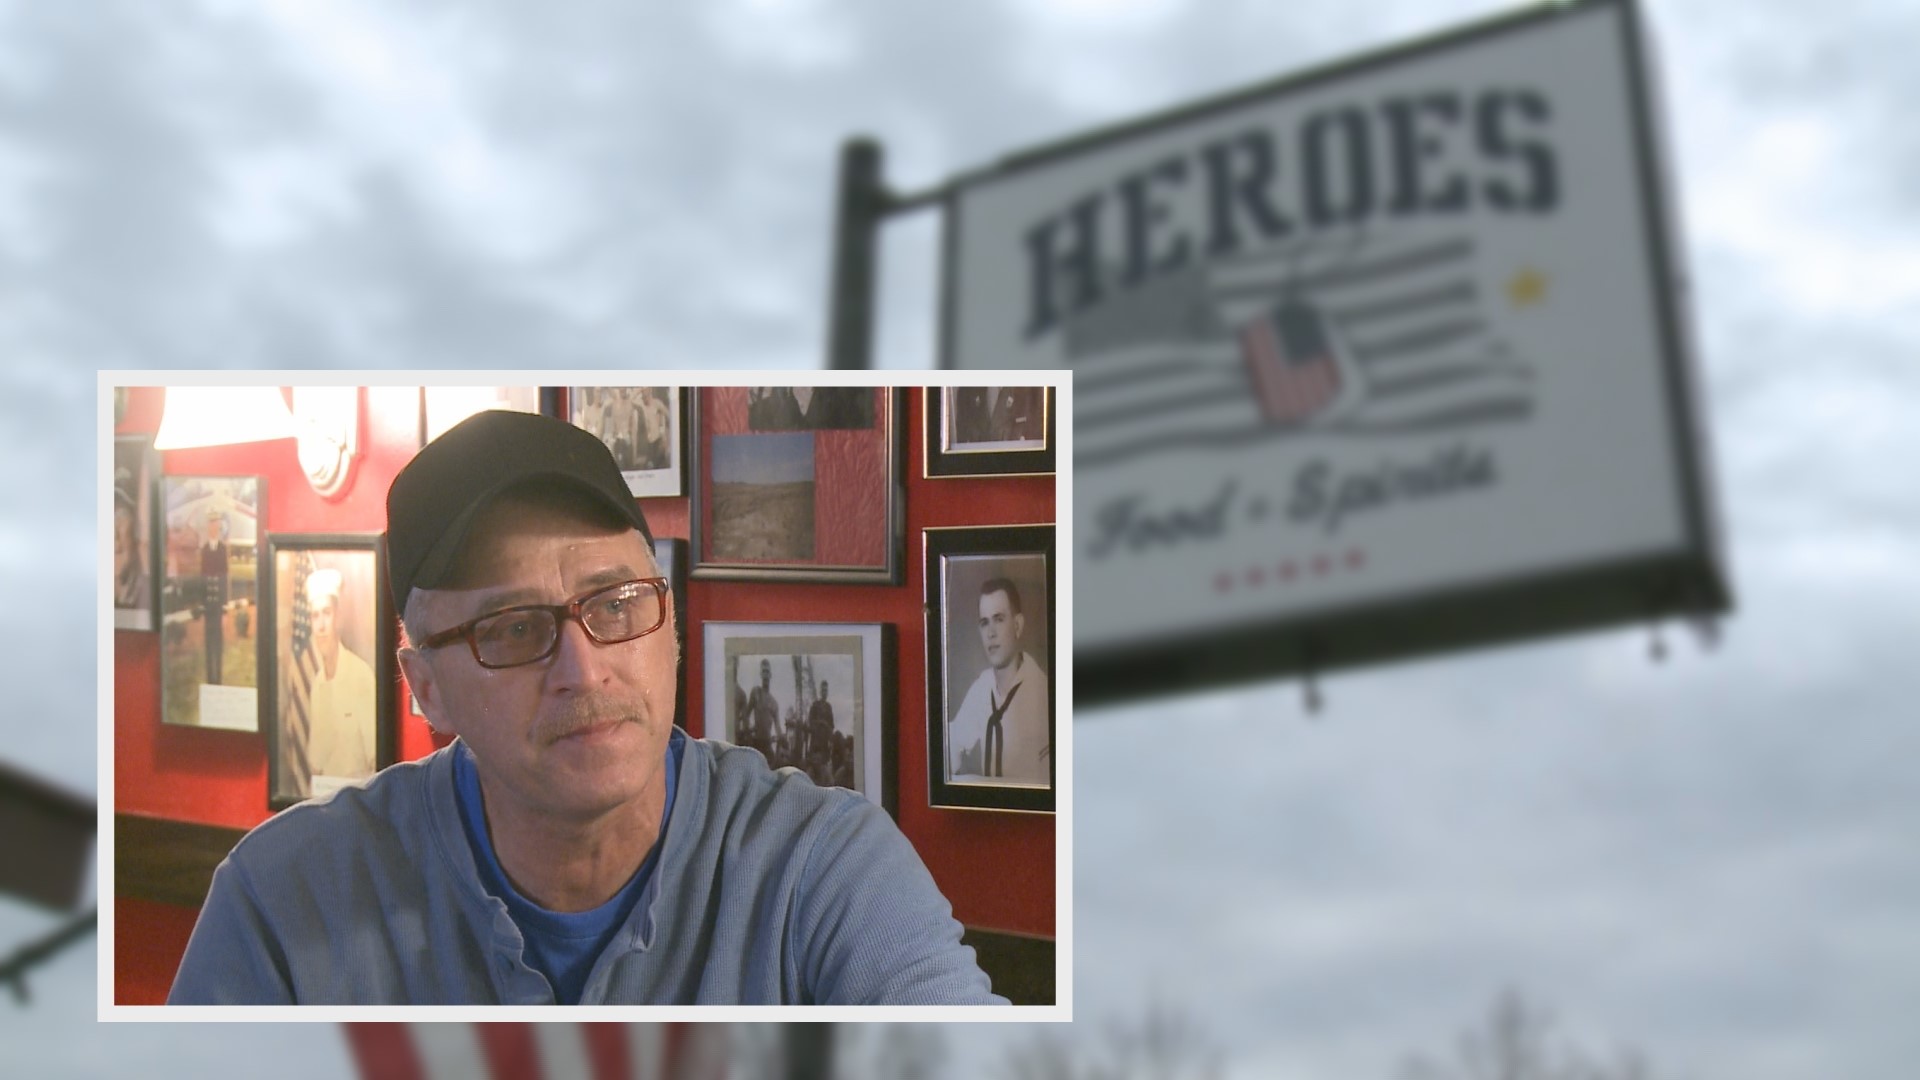 An Allegan County restaurant is pleading for the community's help after an issue with their furnace has them facing a more than $40,000 bill to stay open.